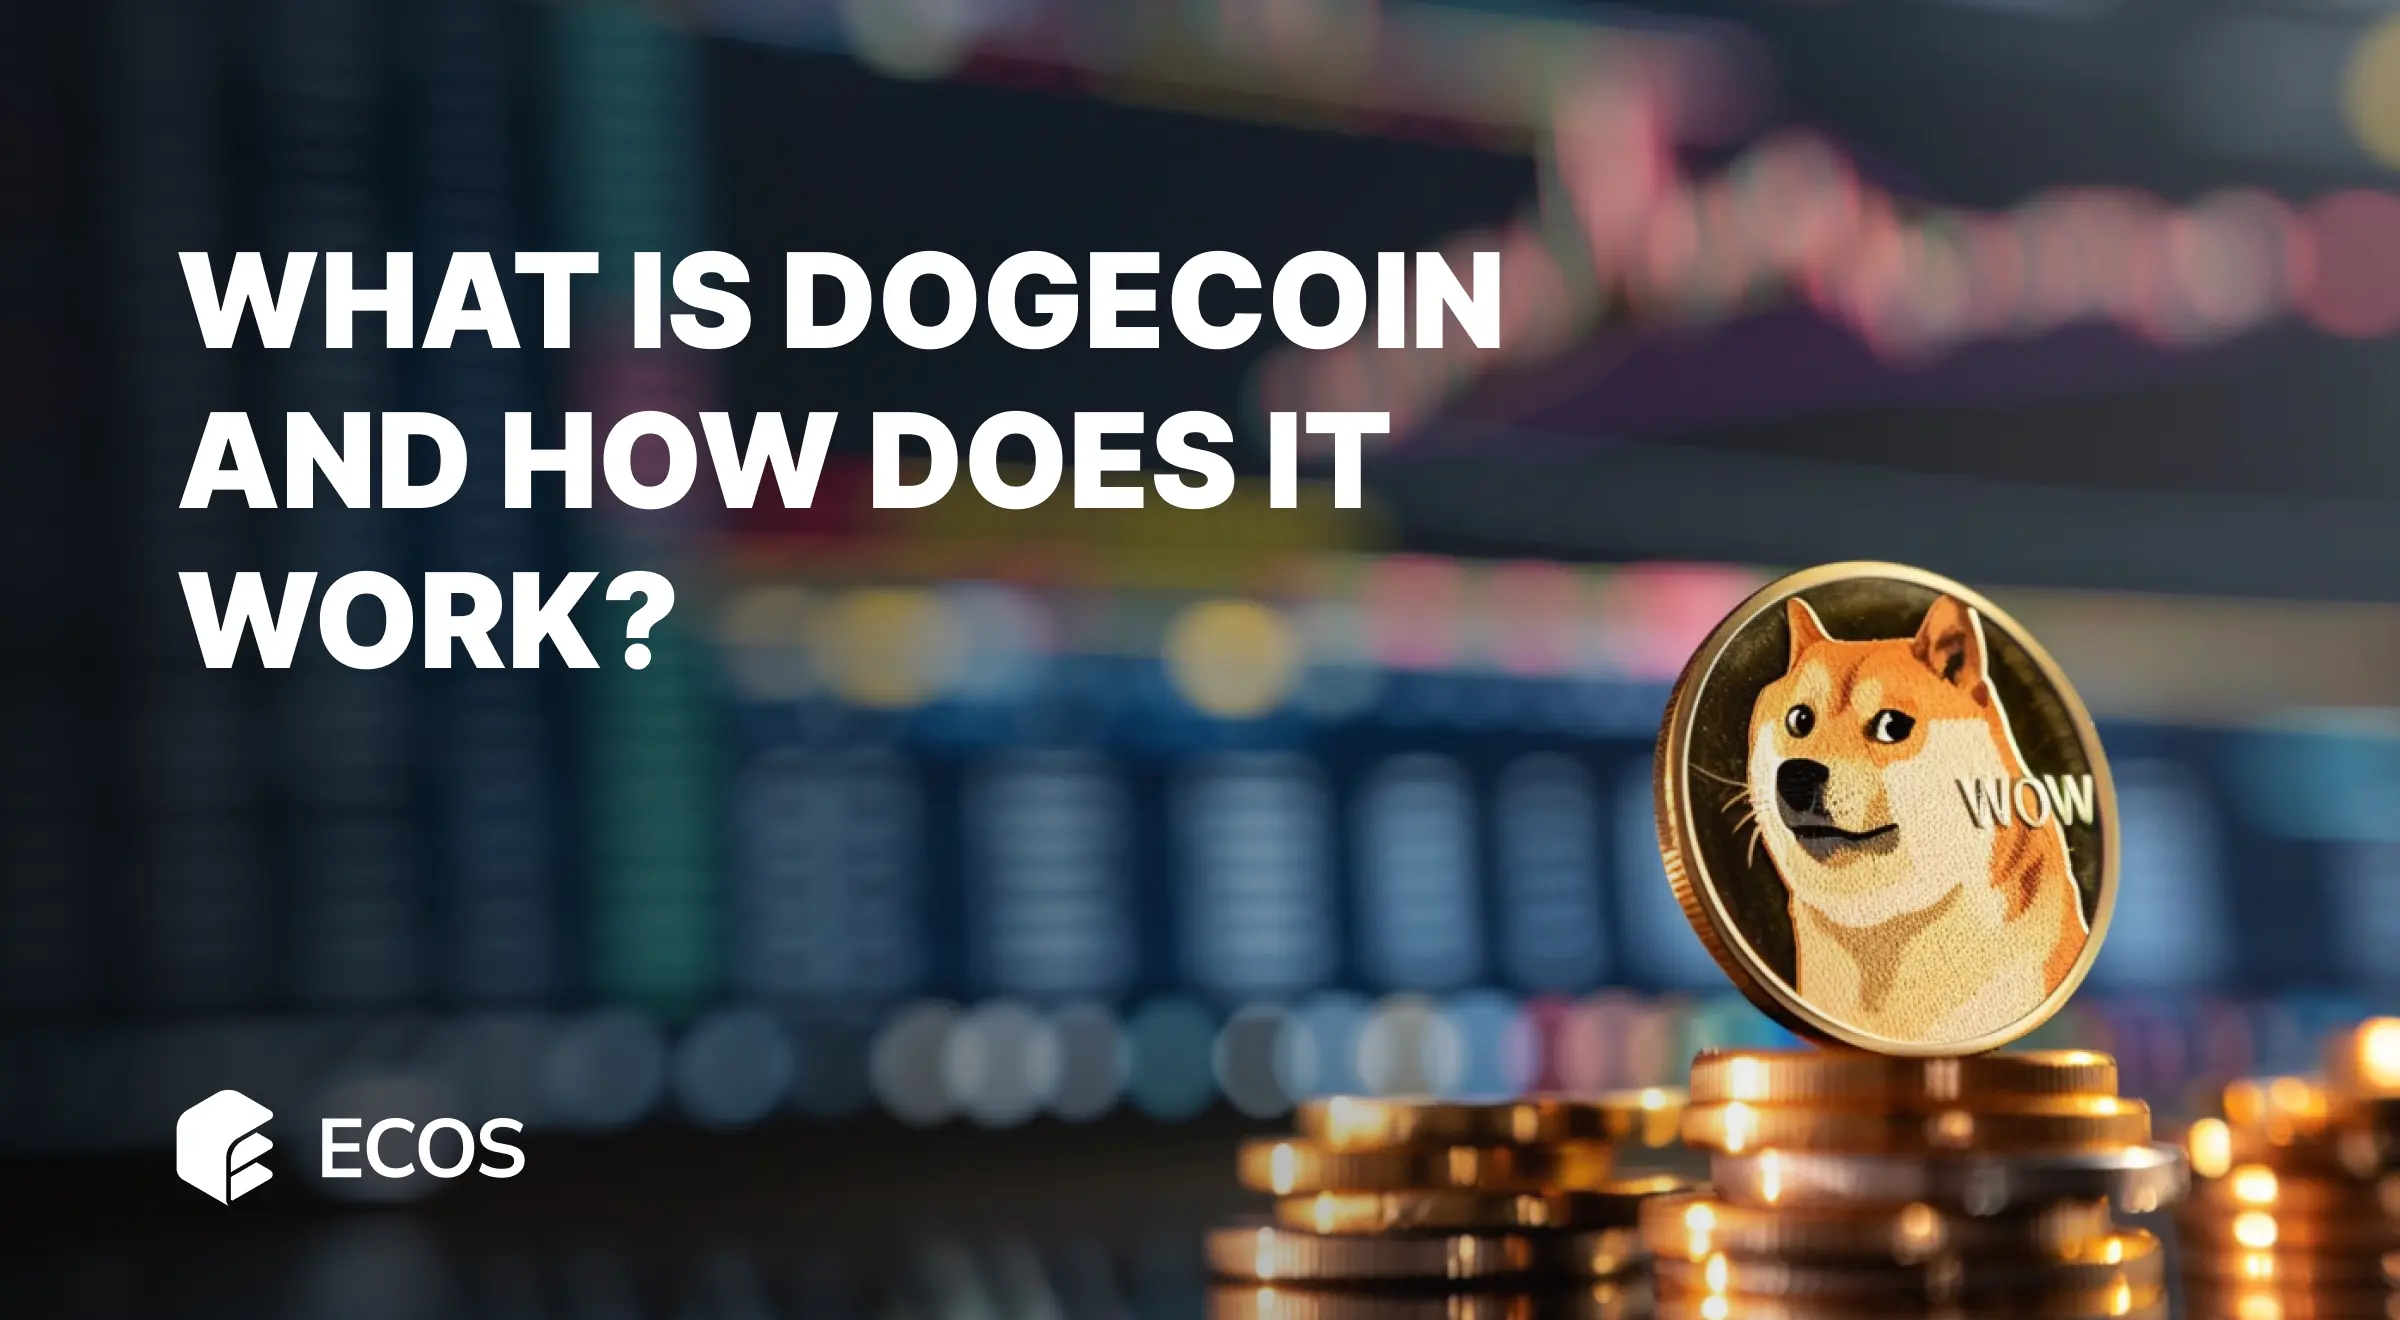 What is dogecoin and how does it work